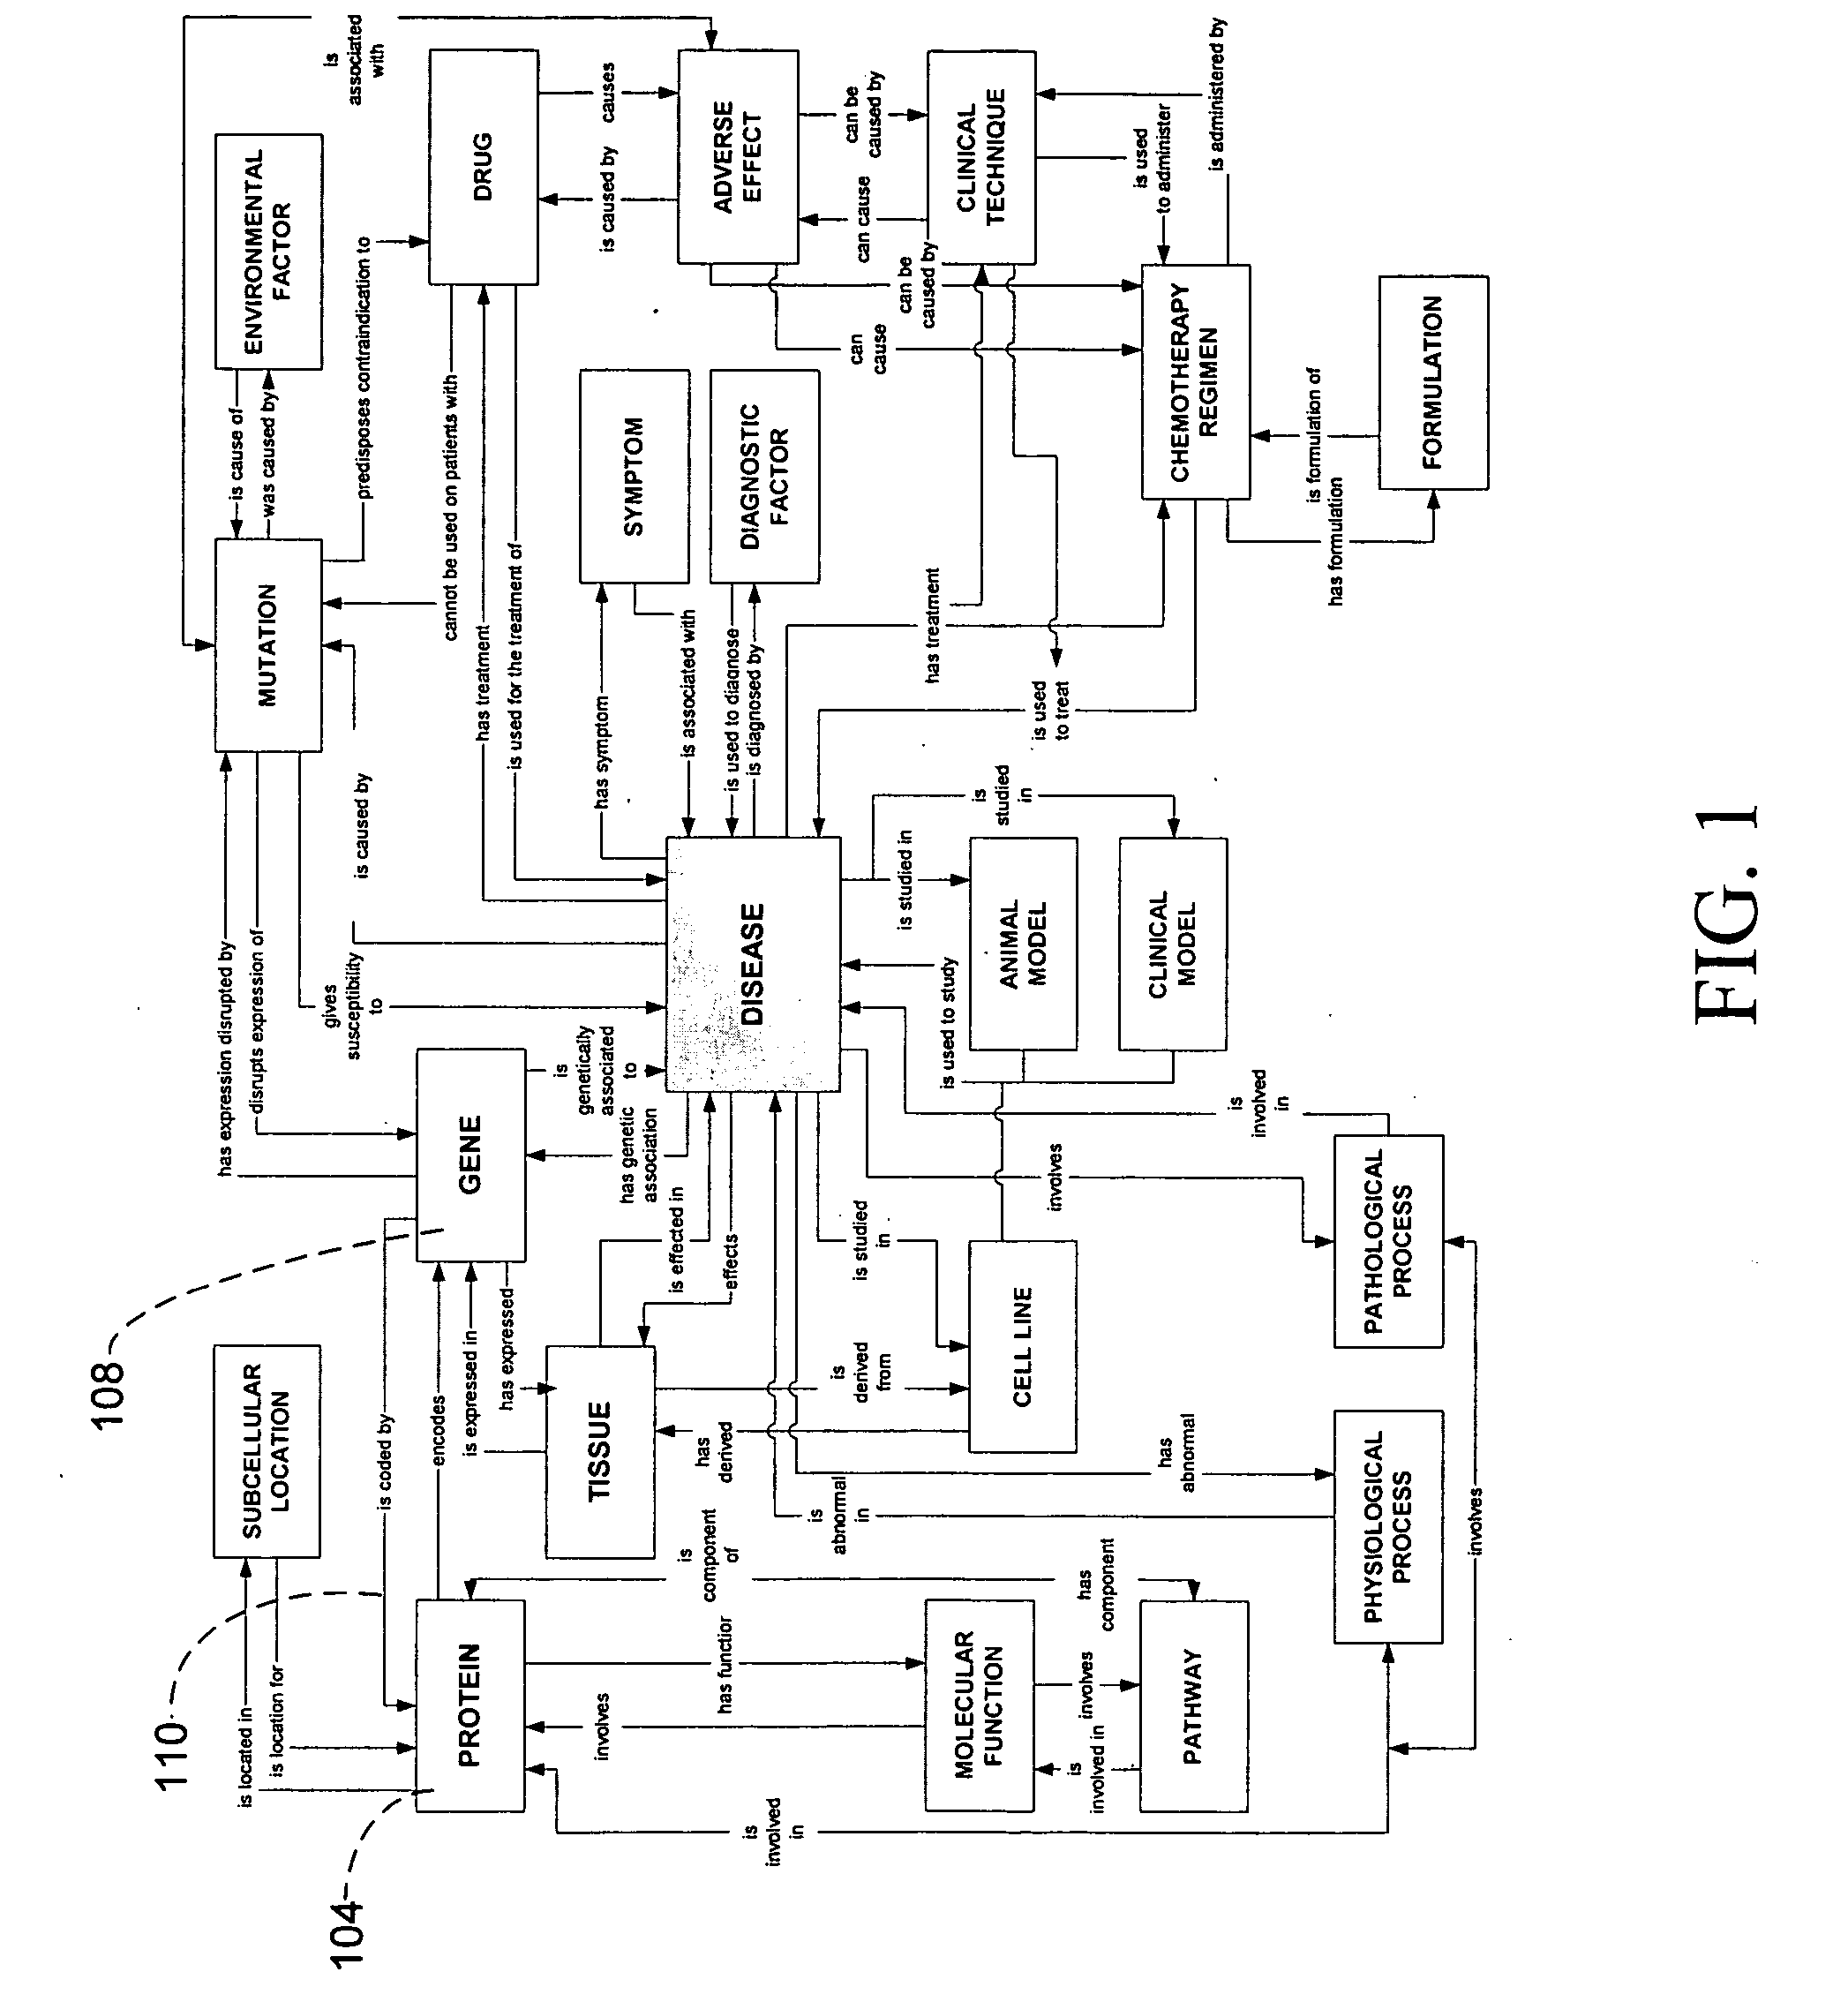 System and method for support of chemical data within multi-relational ontologies